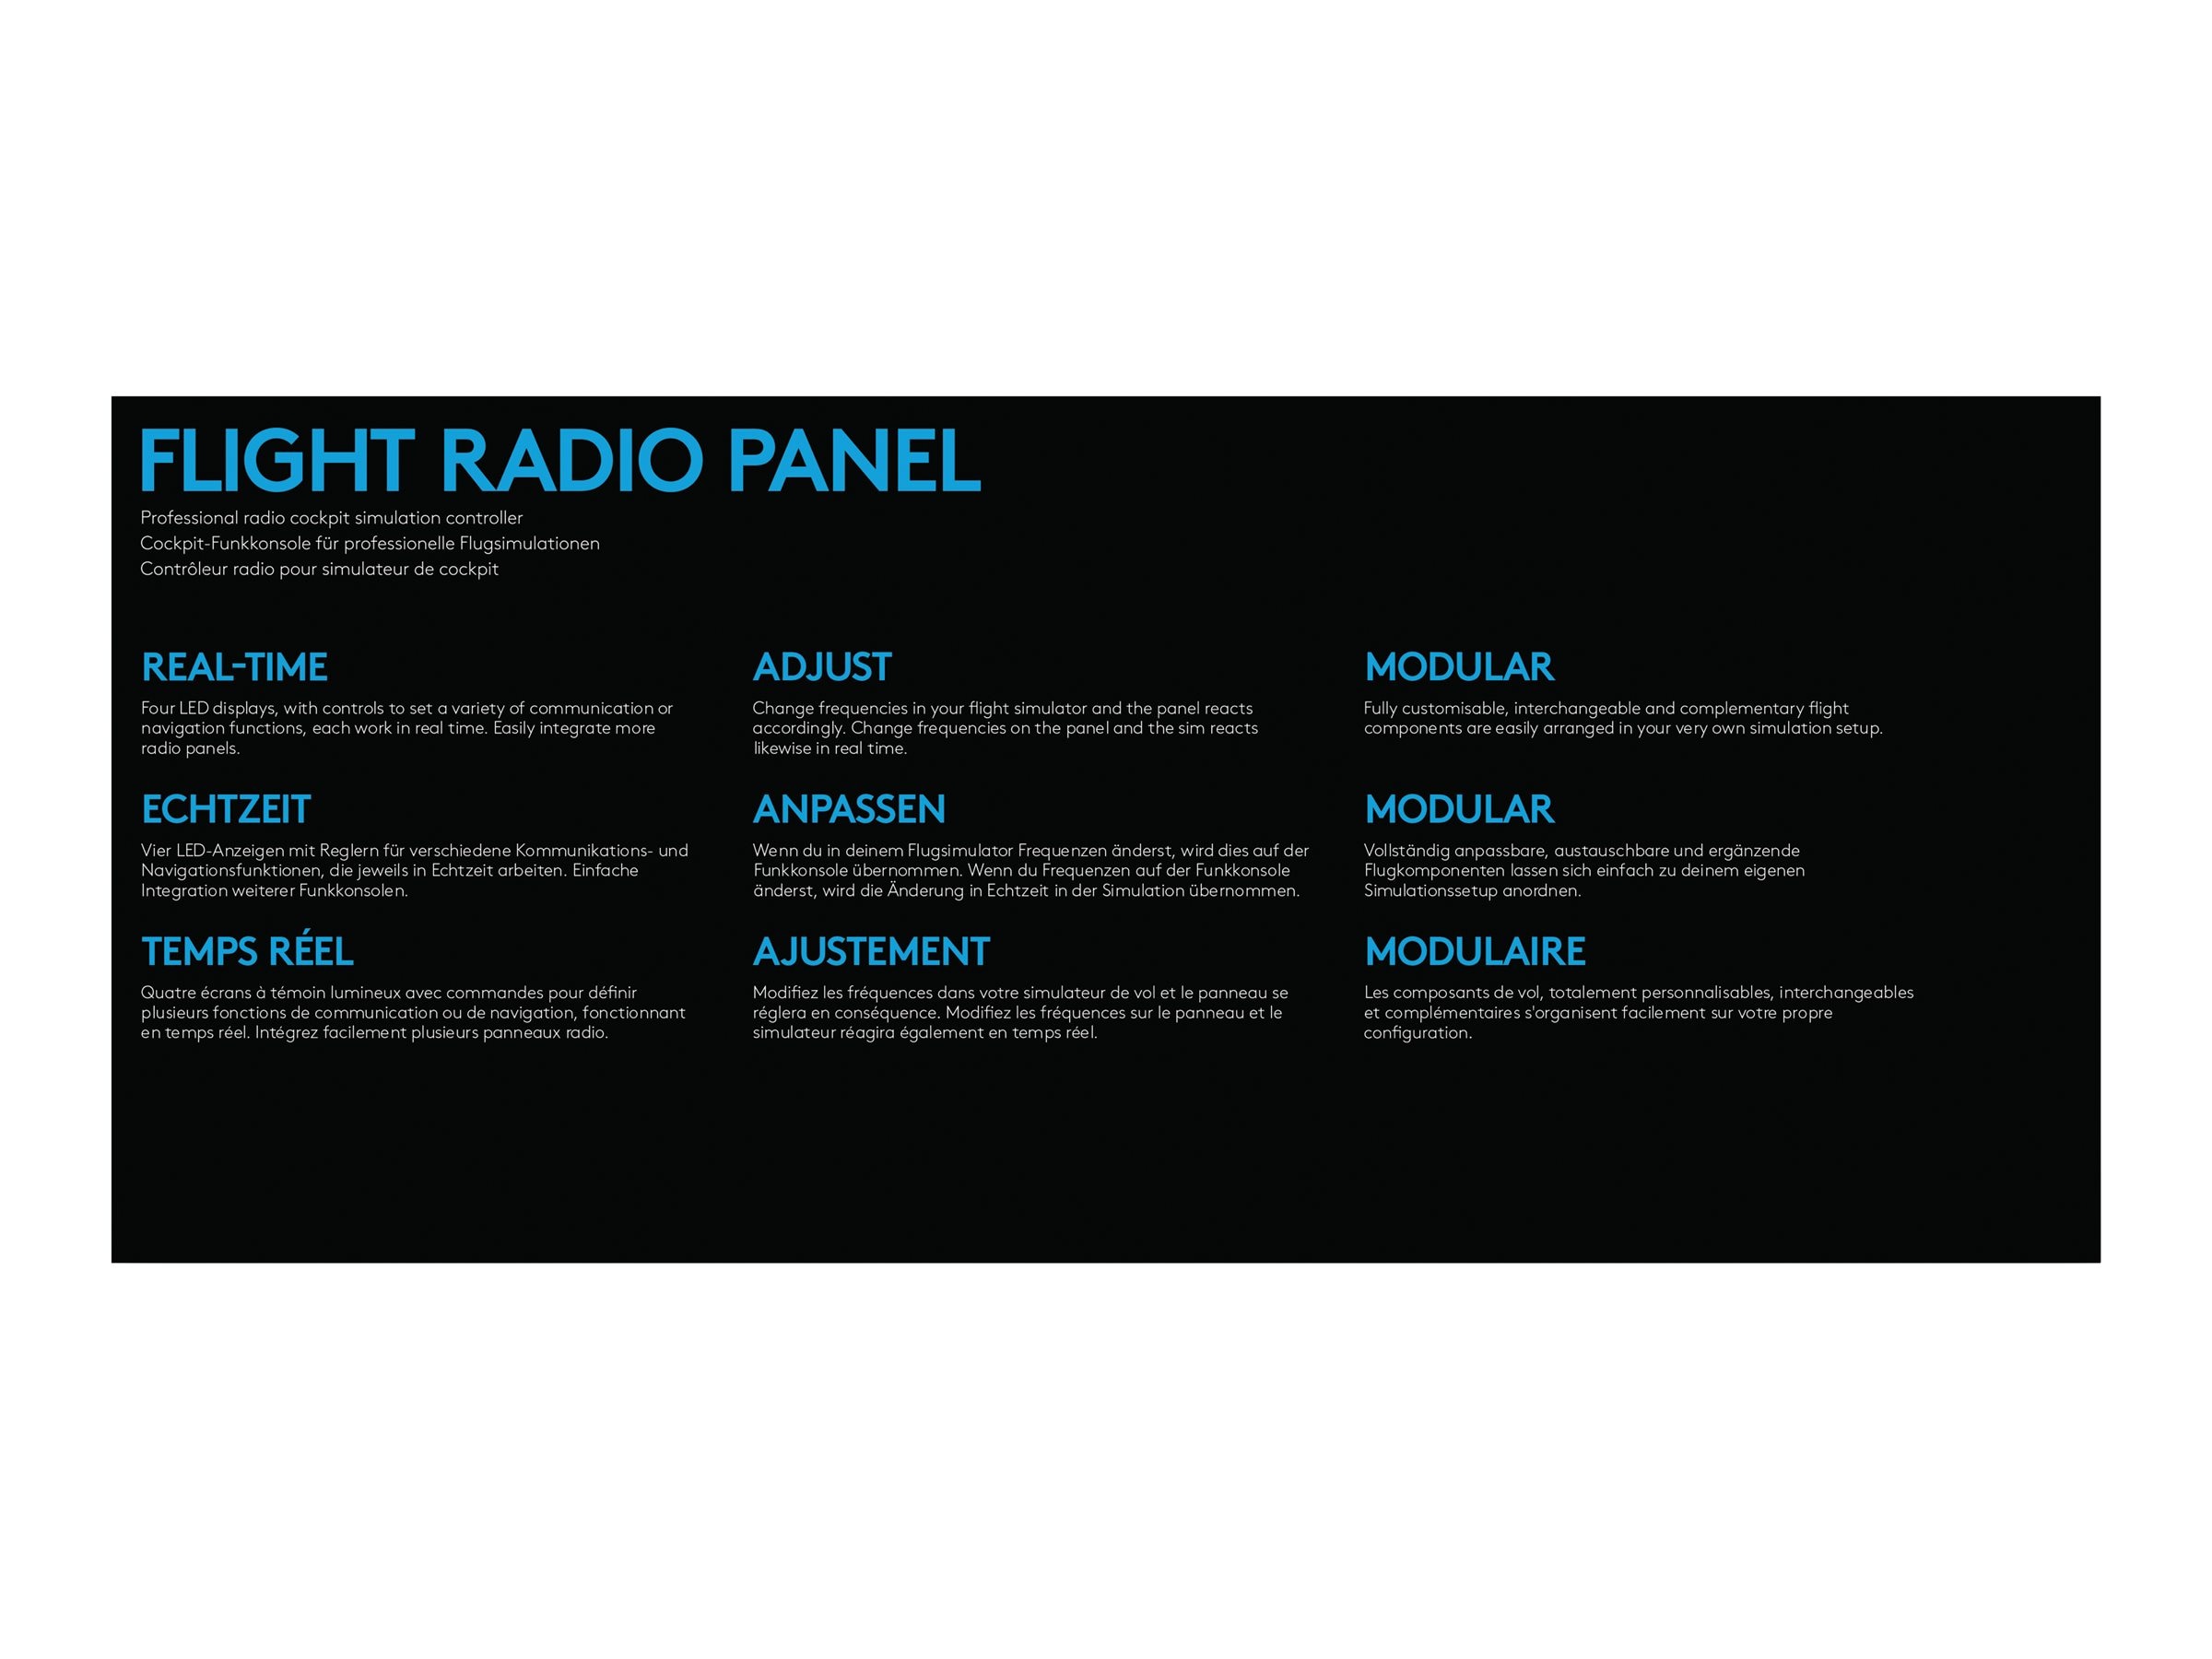 Buy Logitech Flight Radio Panel at Connection Public Sector Solutions